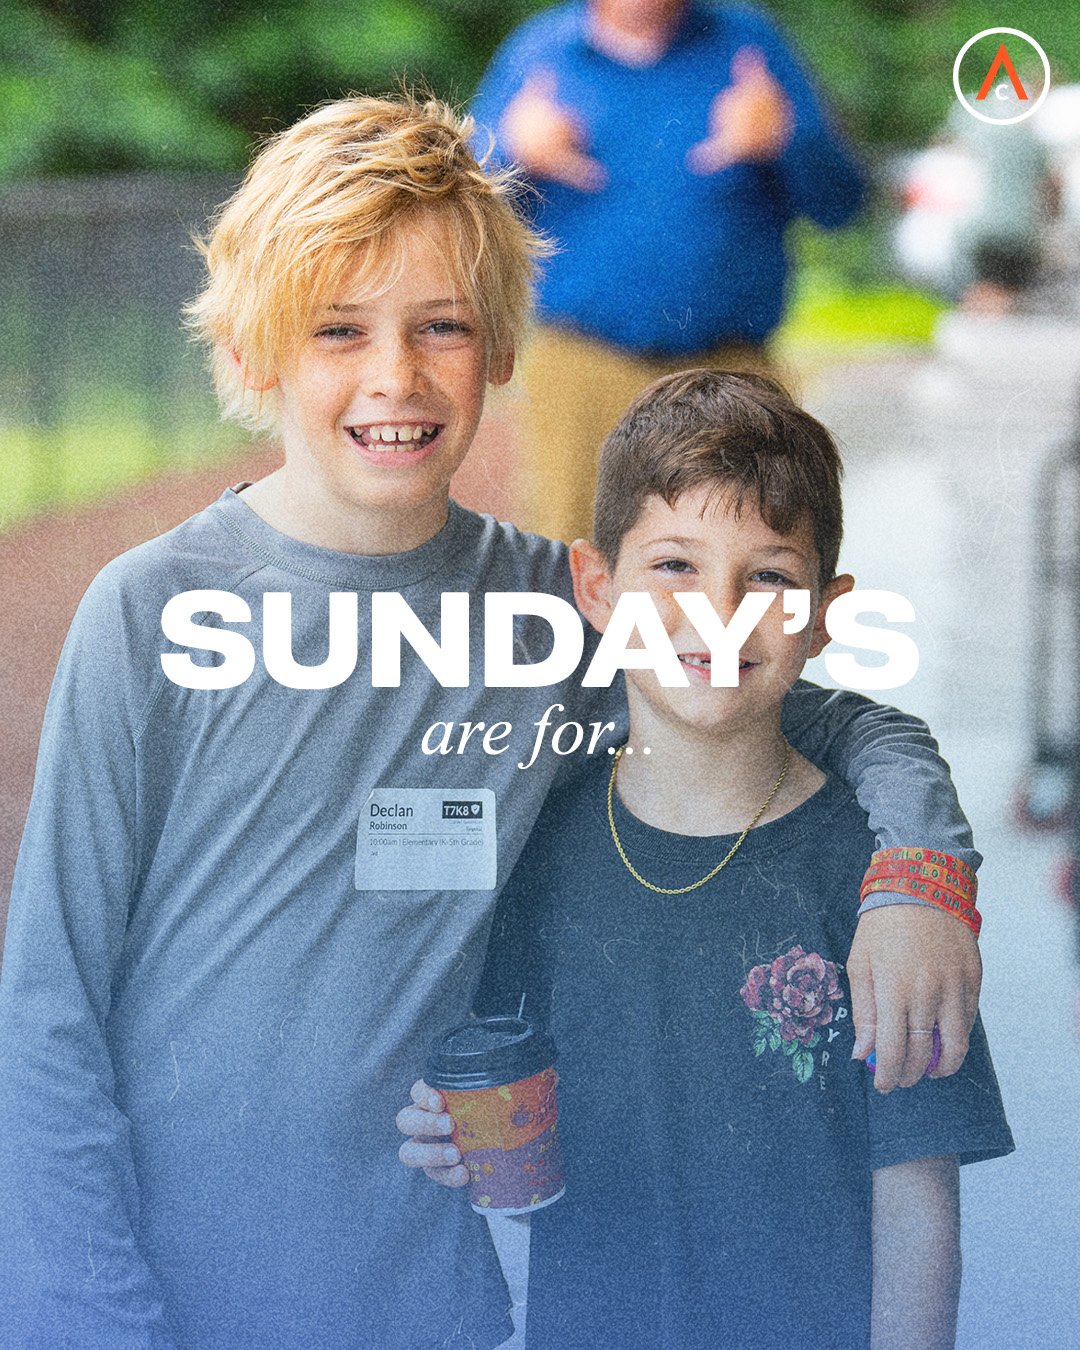 Sundays are the best days of the week! 🙌🤩

Join us on Sunday morning at 8 AM and 10 AM at the Arc of Hilo for a special Mother's Day service! We hope to see you there!